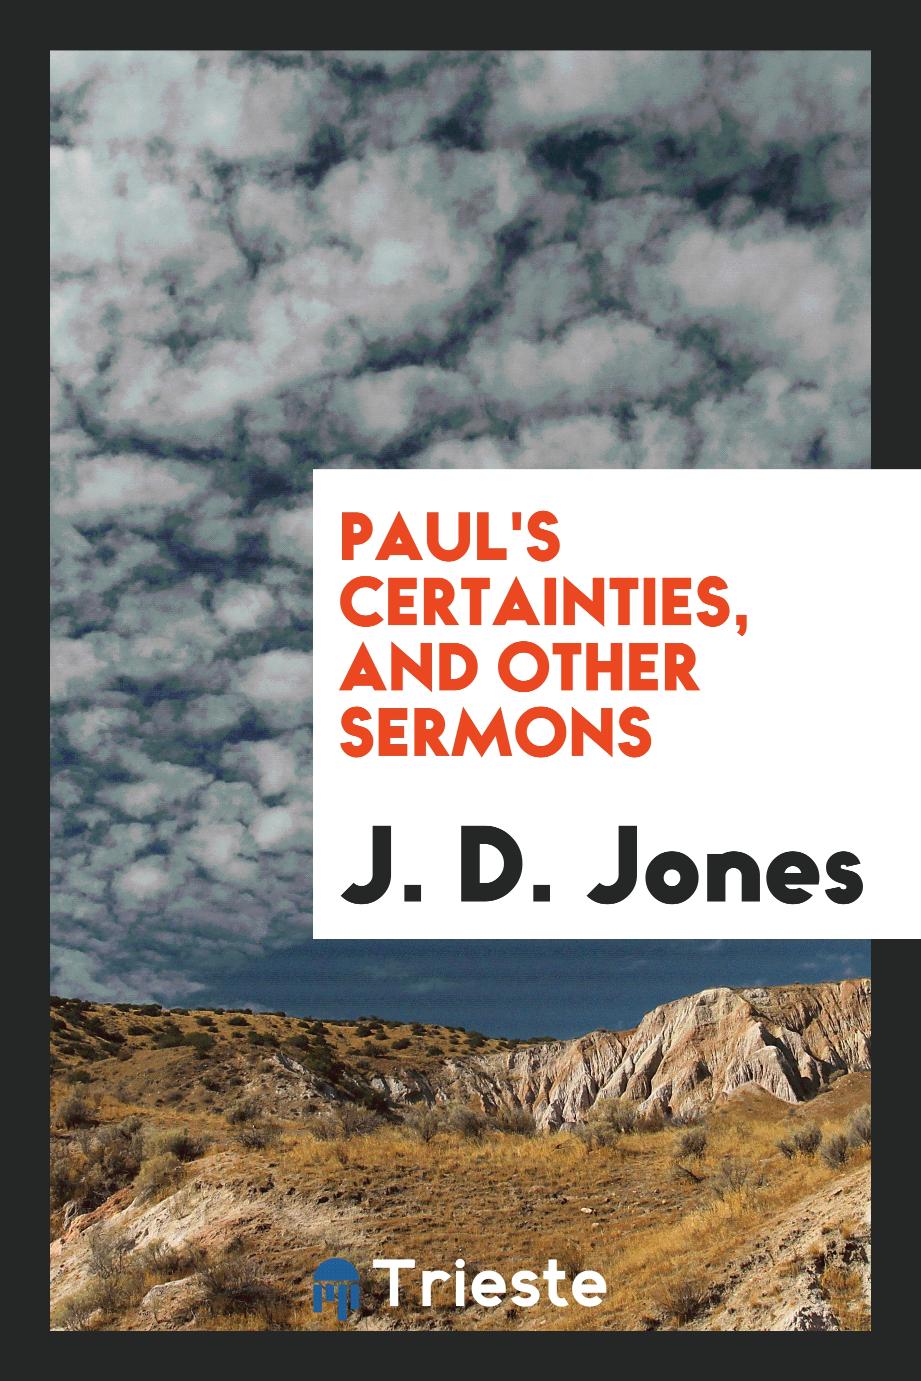 Paul's certainties, and other sermons